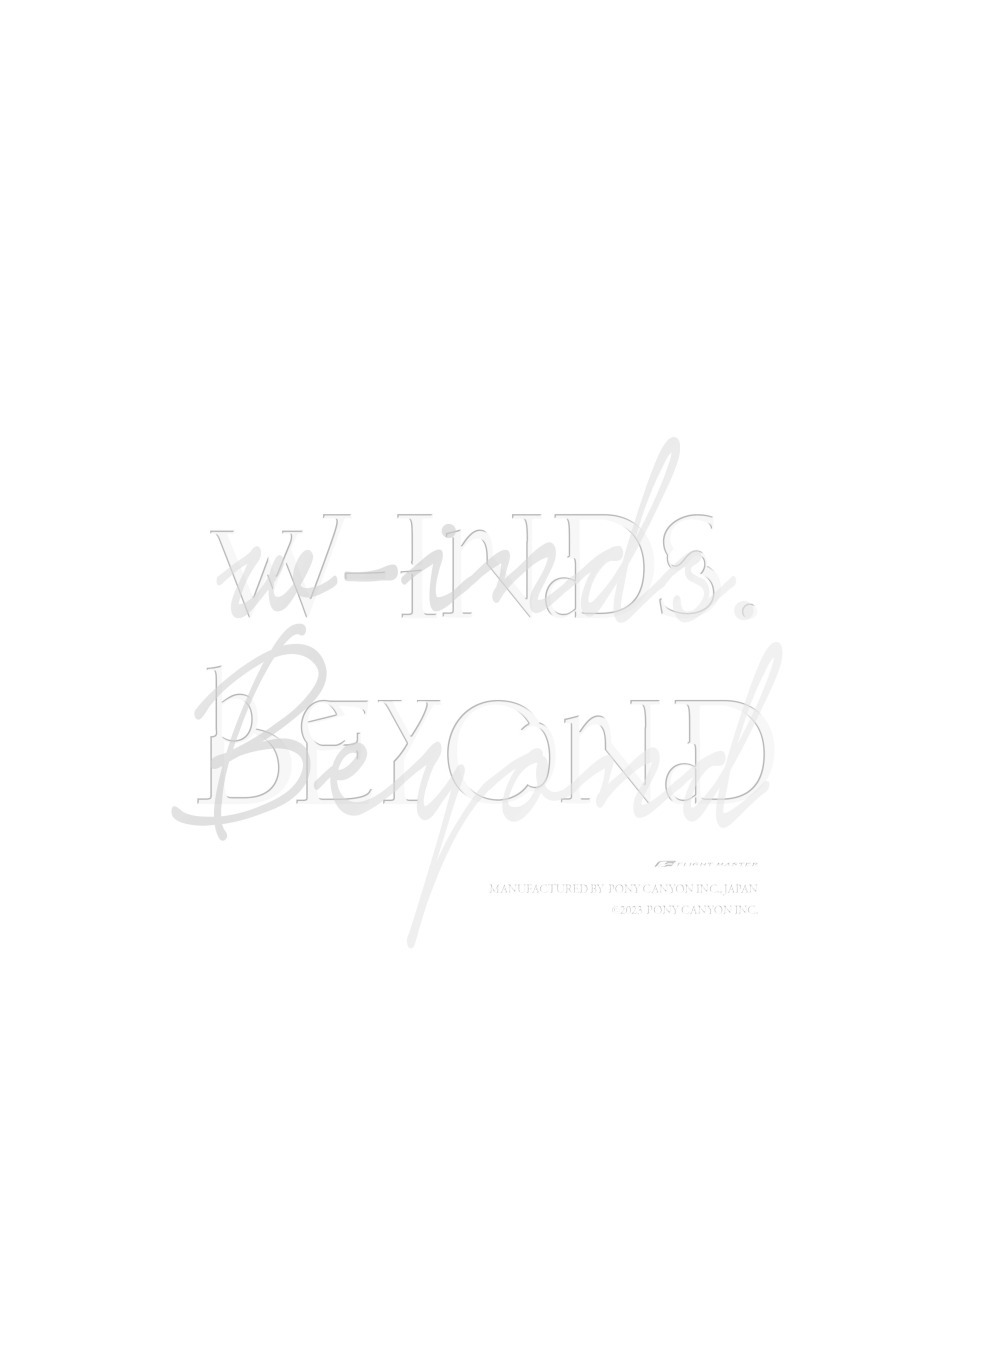 『Beyond』Special Book盤ジャケット